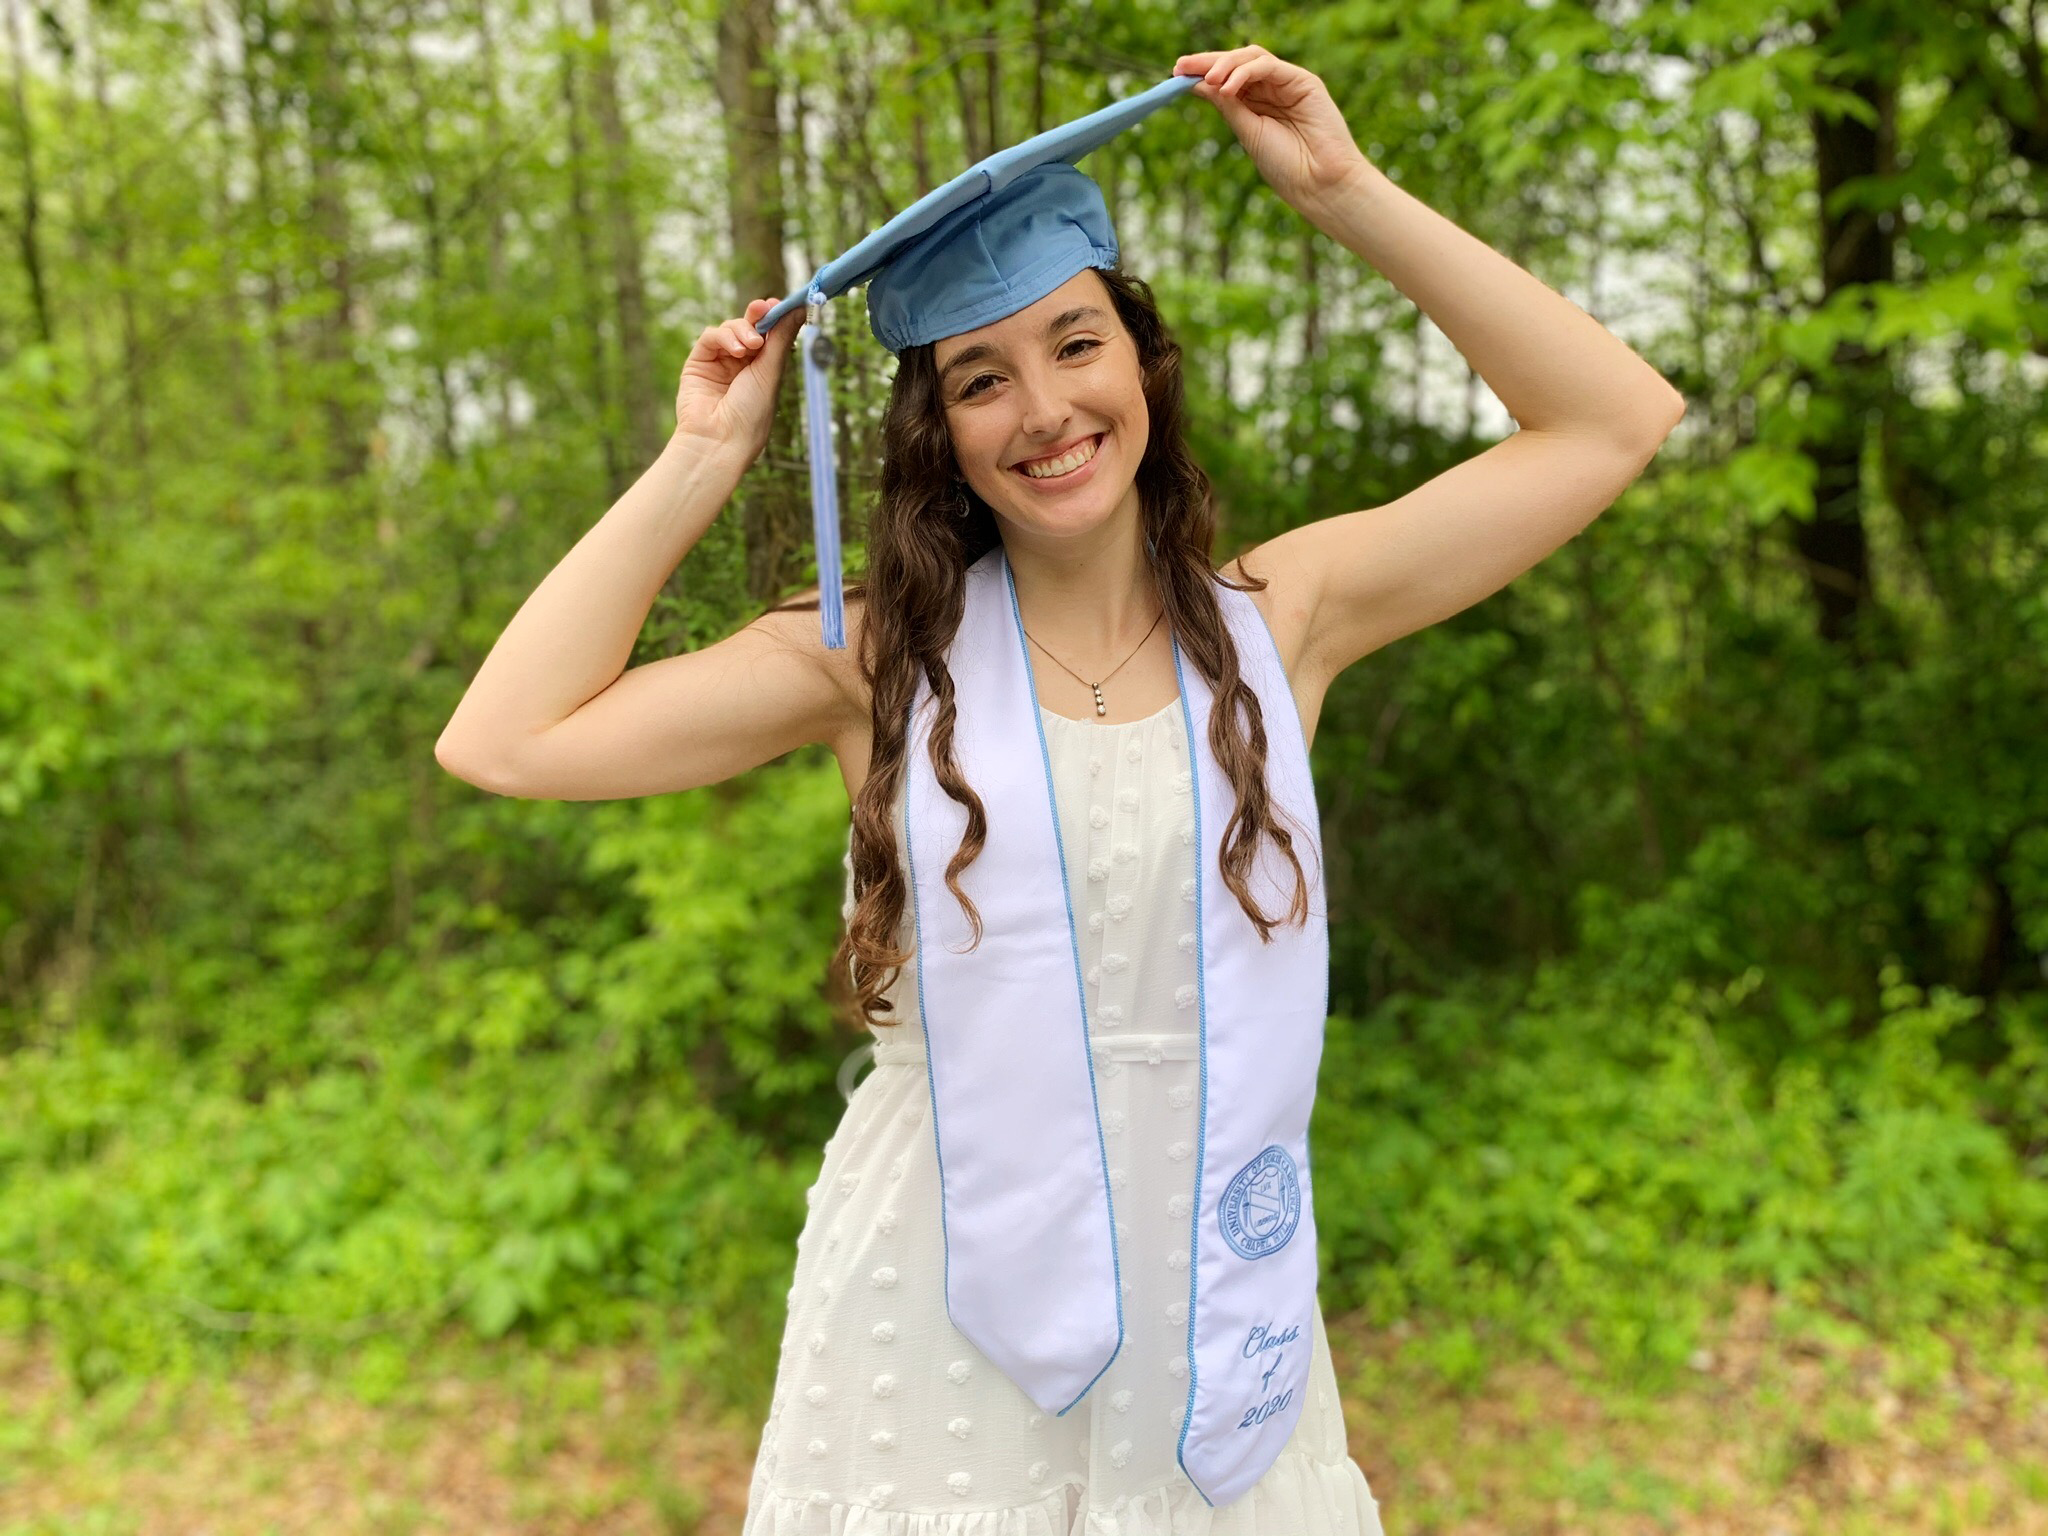 Lauren Revis stands in a yard with her graduation cap on in a white dress.